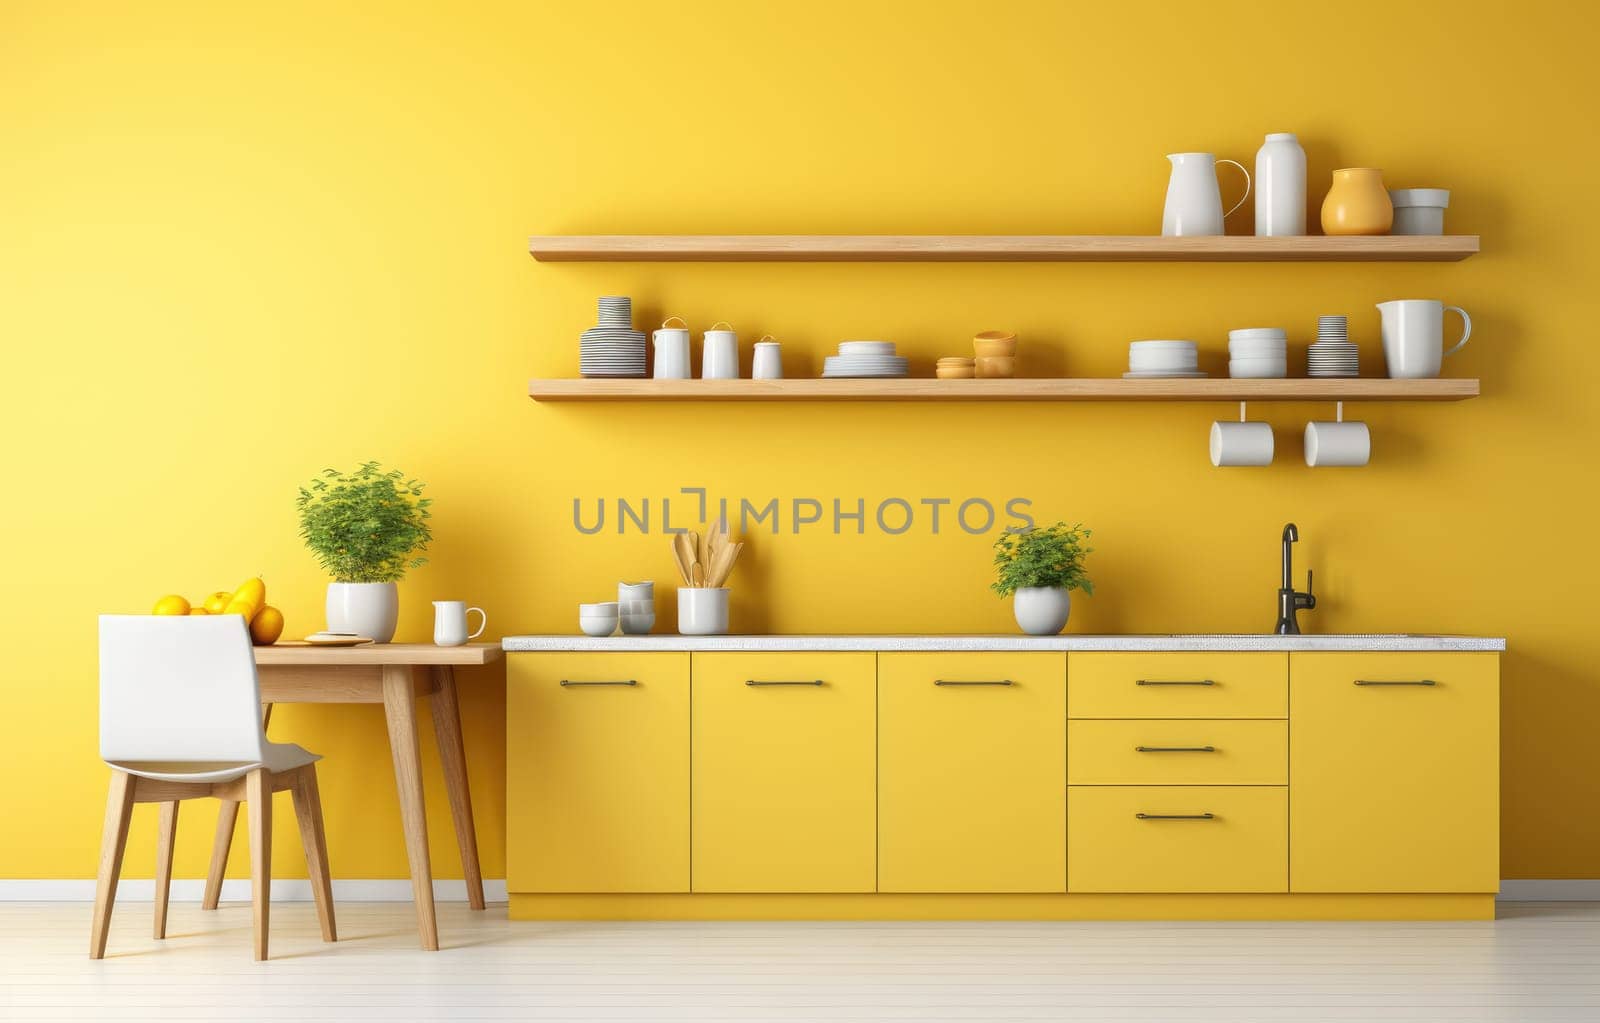 Kitchen modern eclectic, craziness,vibrant yellow colour dominate ,with modern minimalistic elements with boho style elements and appliances in complementary colors